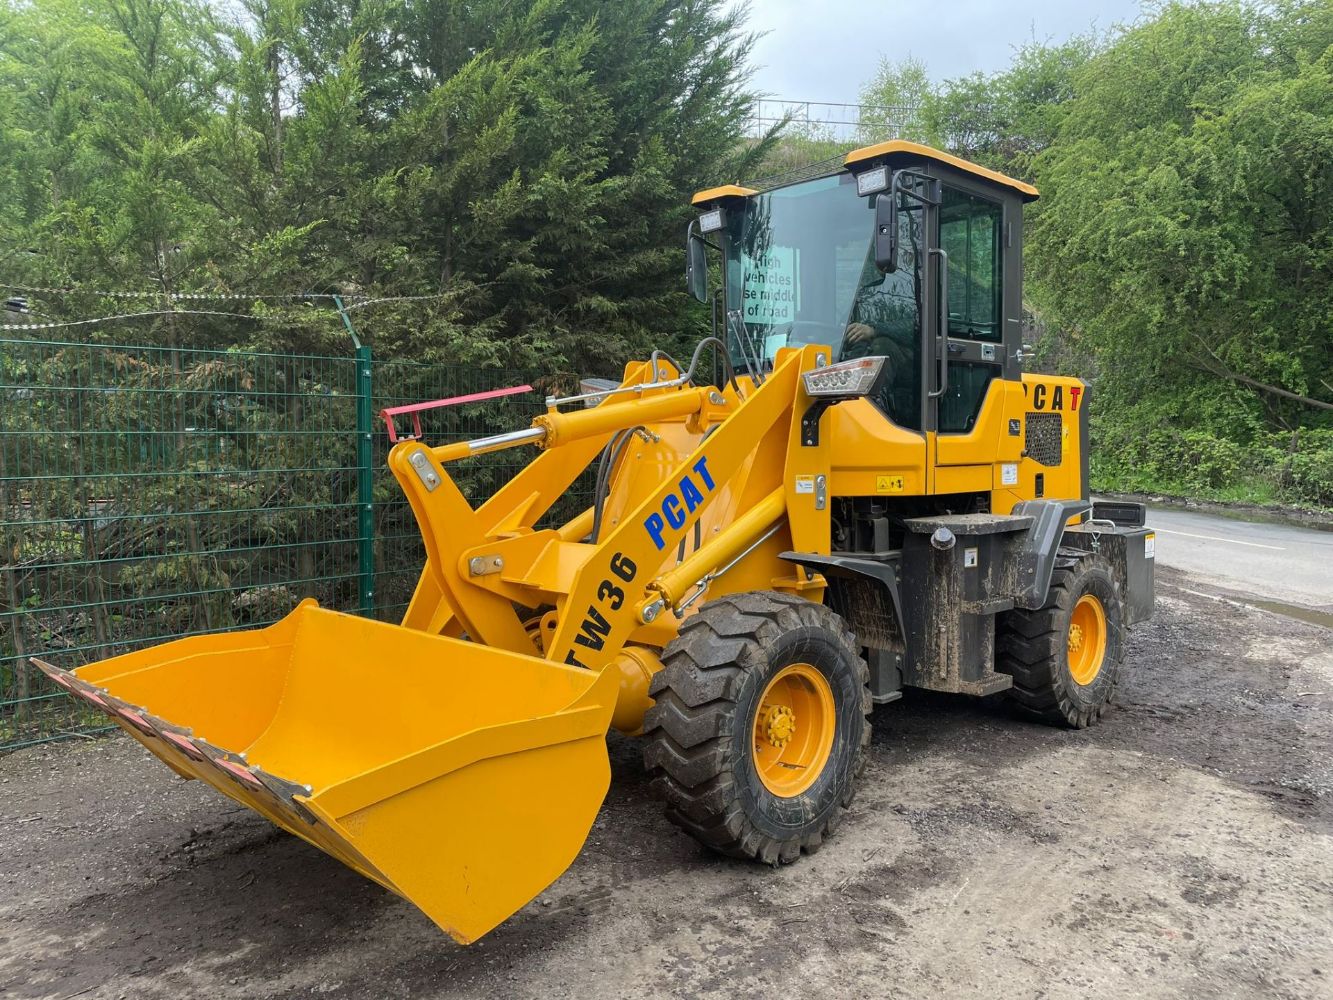 FRIDAY MORNING SALE! ENDS FROM 11AM INCLUDES TARMAC PLANER, 14TON EXCAVATOR, SCARAB SWEEPER, LAND ROVER, DUMPERS, DIGGERS, FORKLIFTS & MUCH MORE